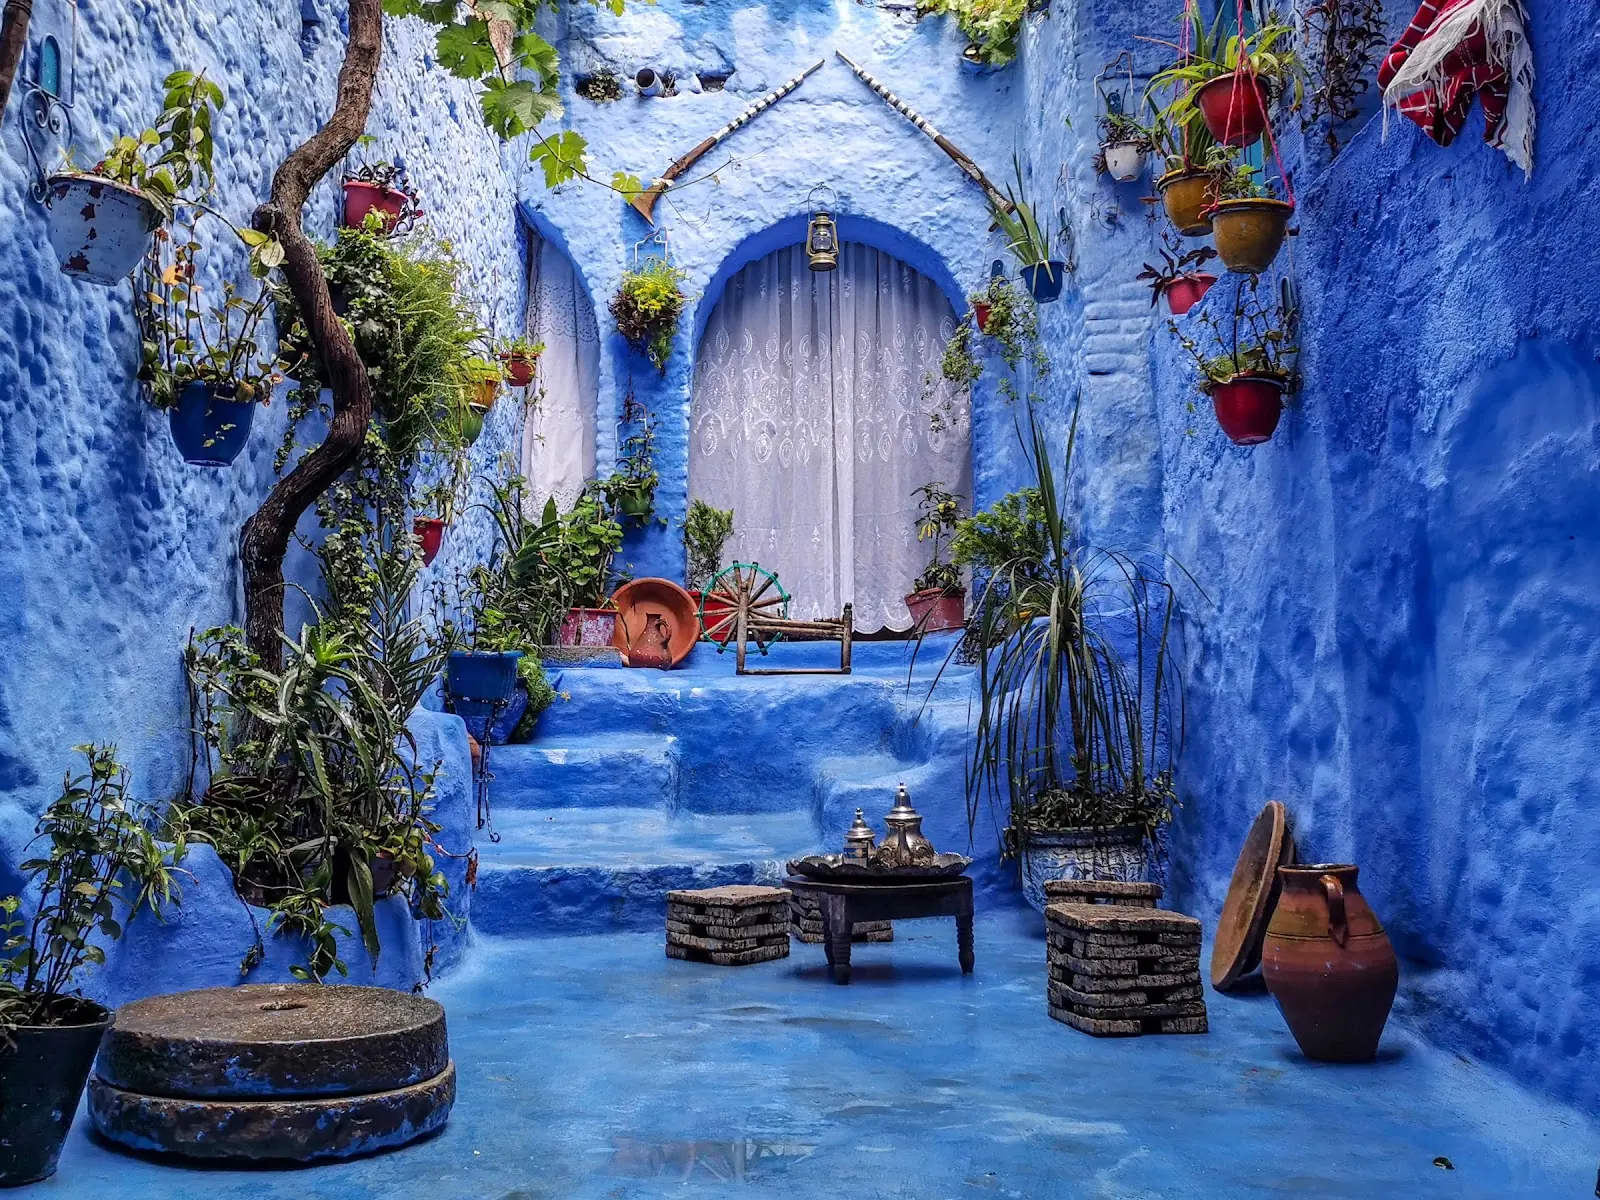 A small blue painted courtyard with pot plants on the walls.